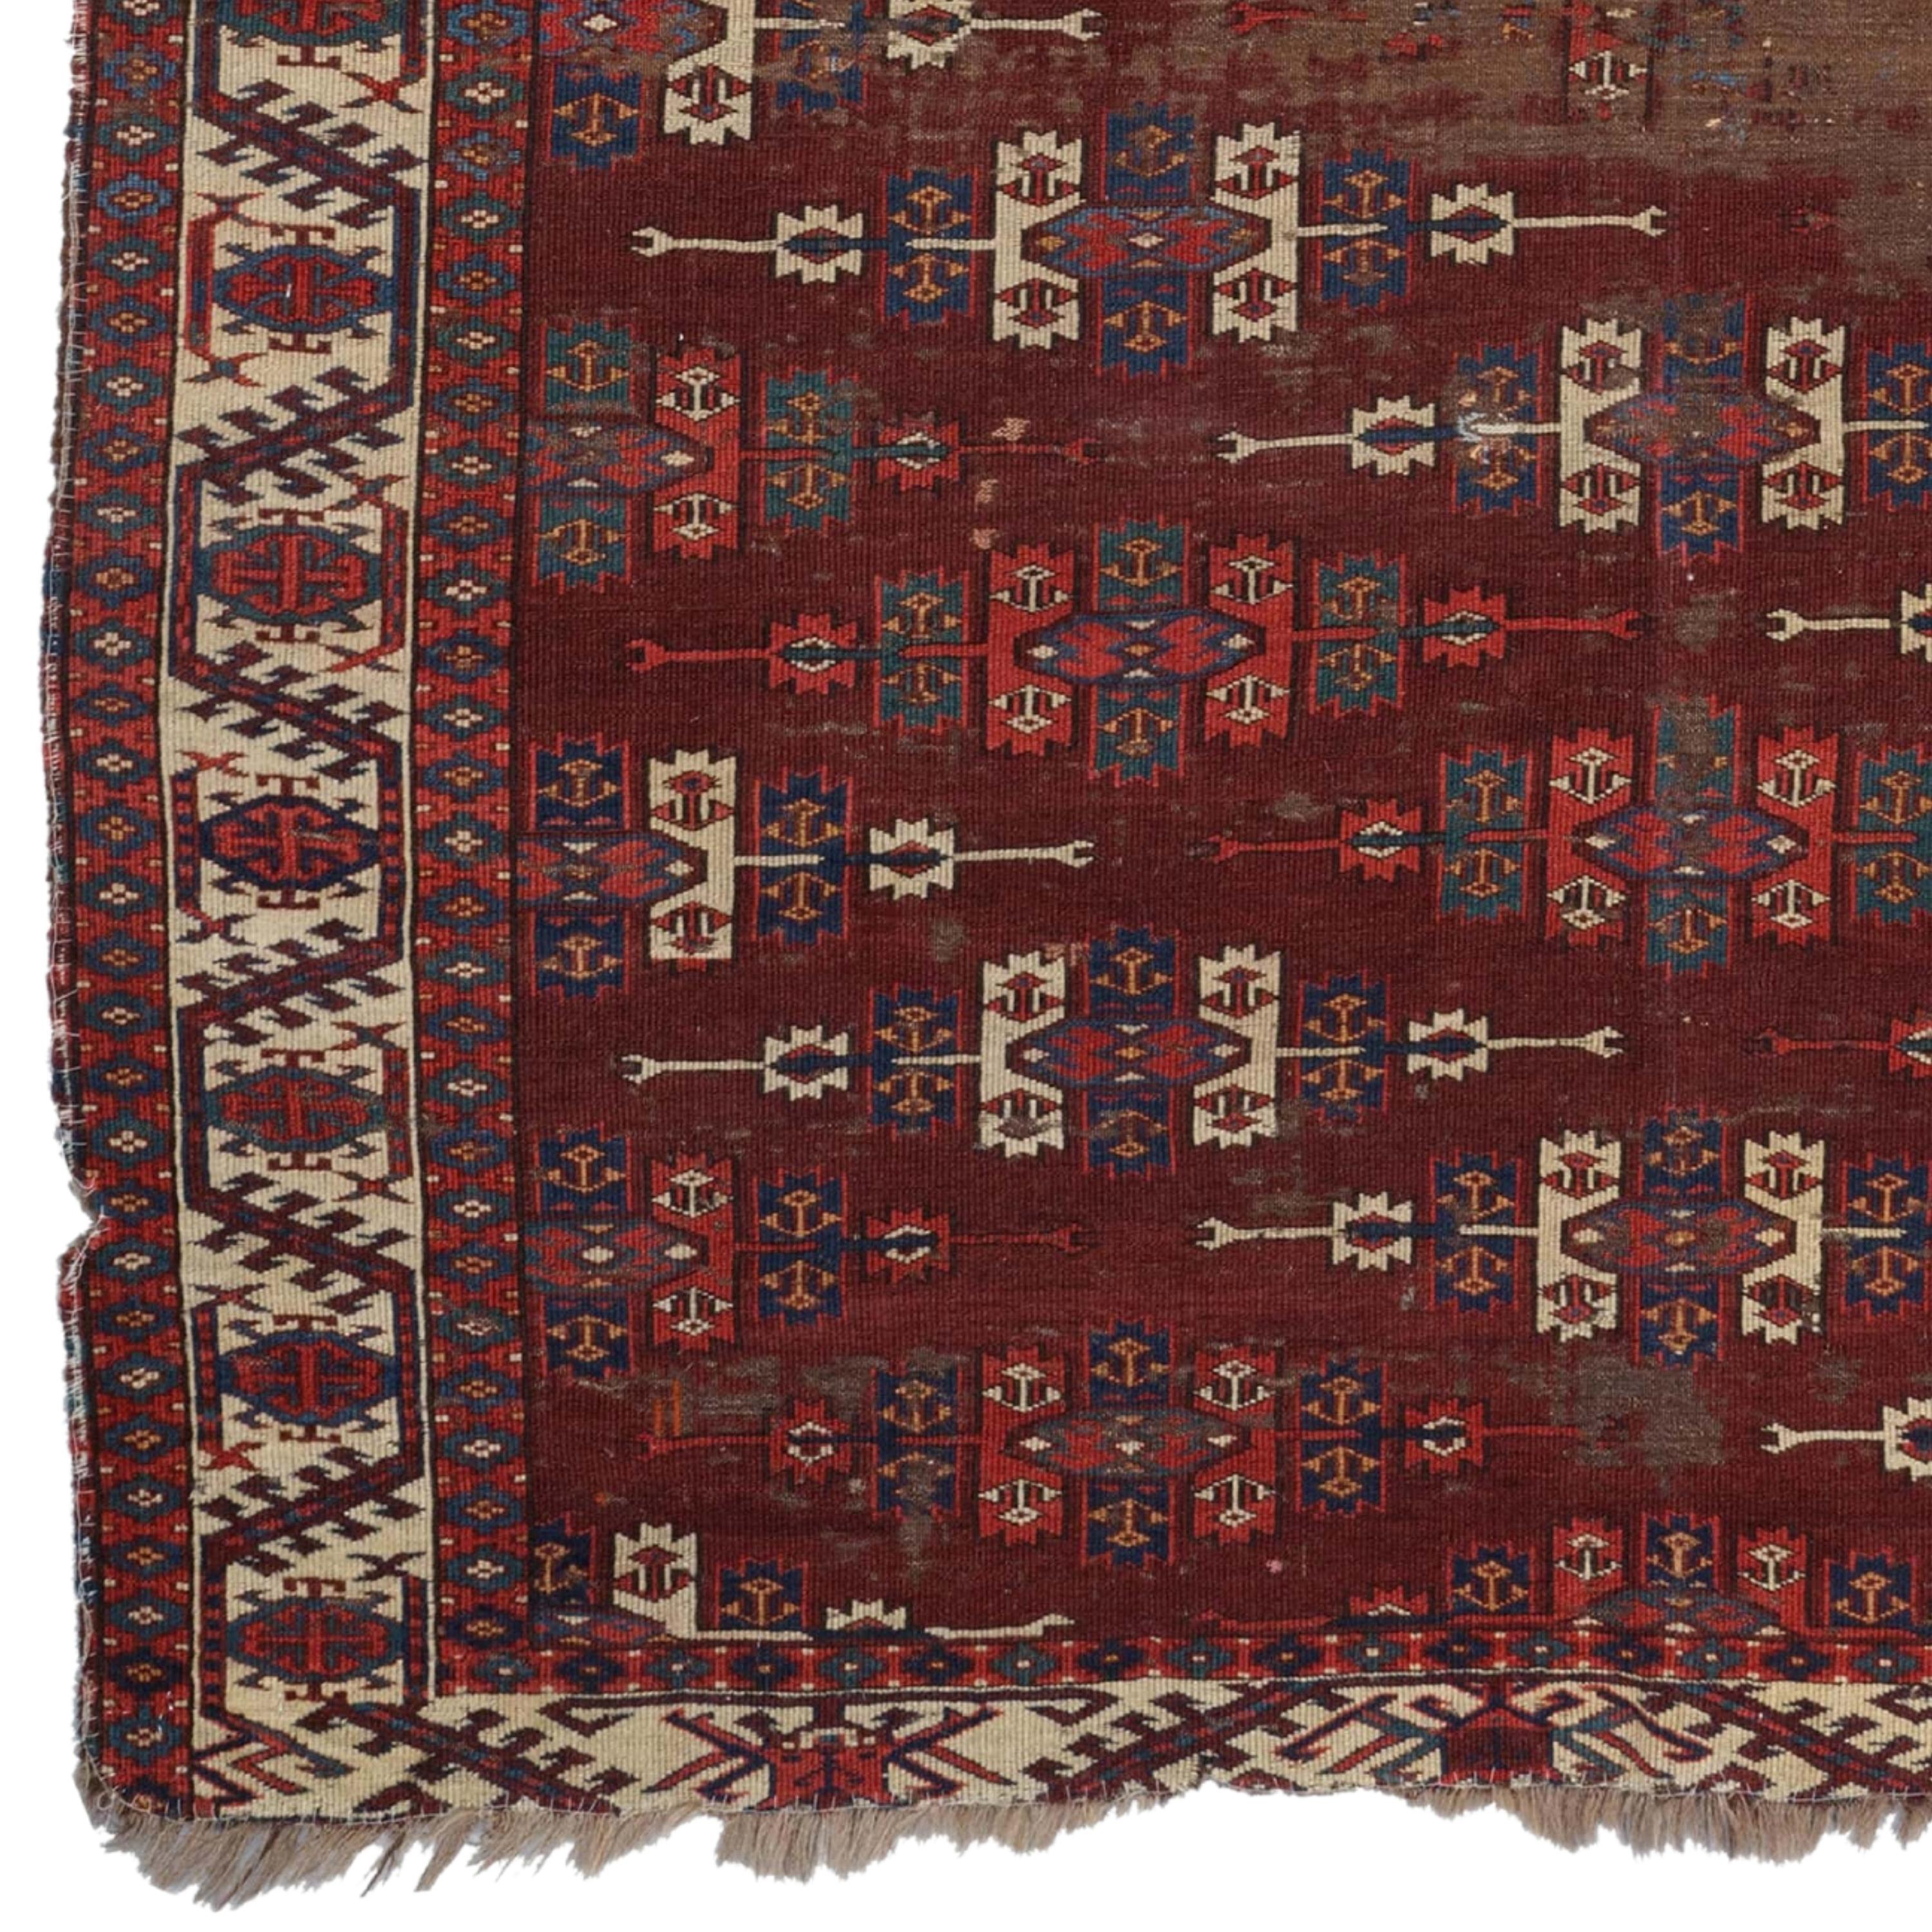 This elegant 19th century Yomud Dyrnak Gul carpet attracts attention with its historical texture and unique patterns. This hand-woven rug in rich shades of red and brown is a perfect example of authentic Yomud design. Each corner of the antique